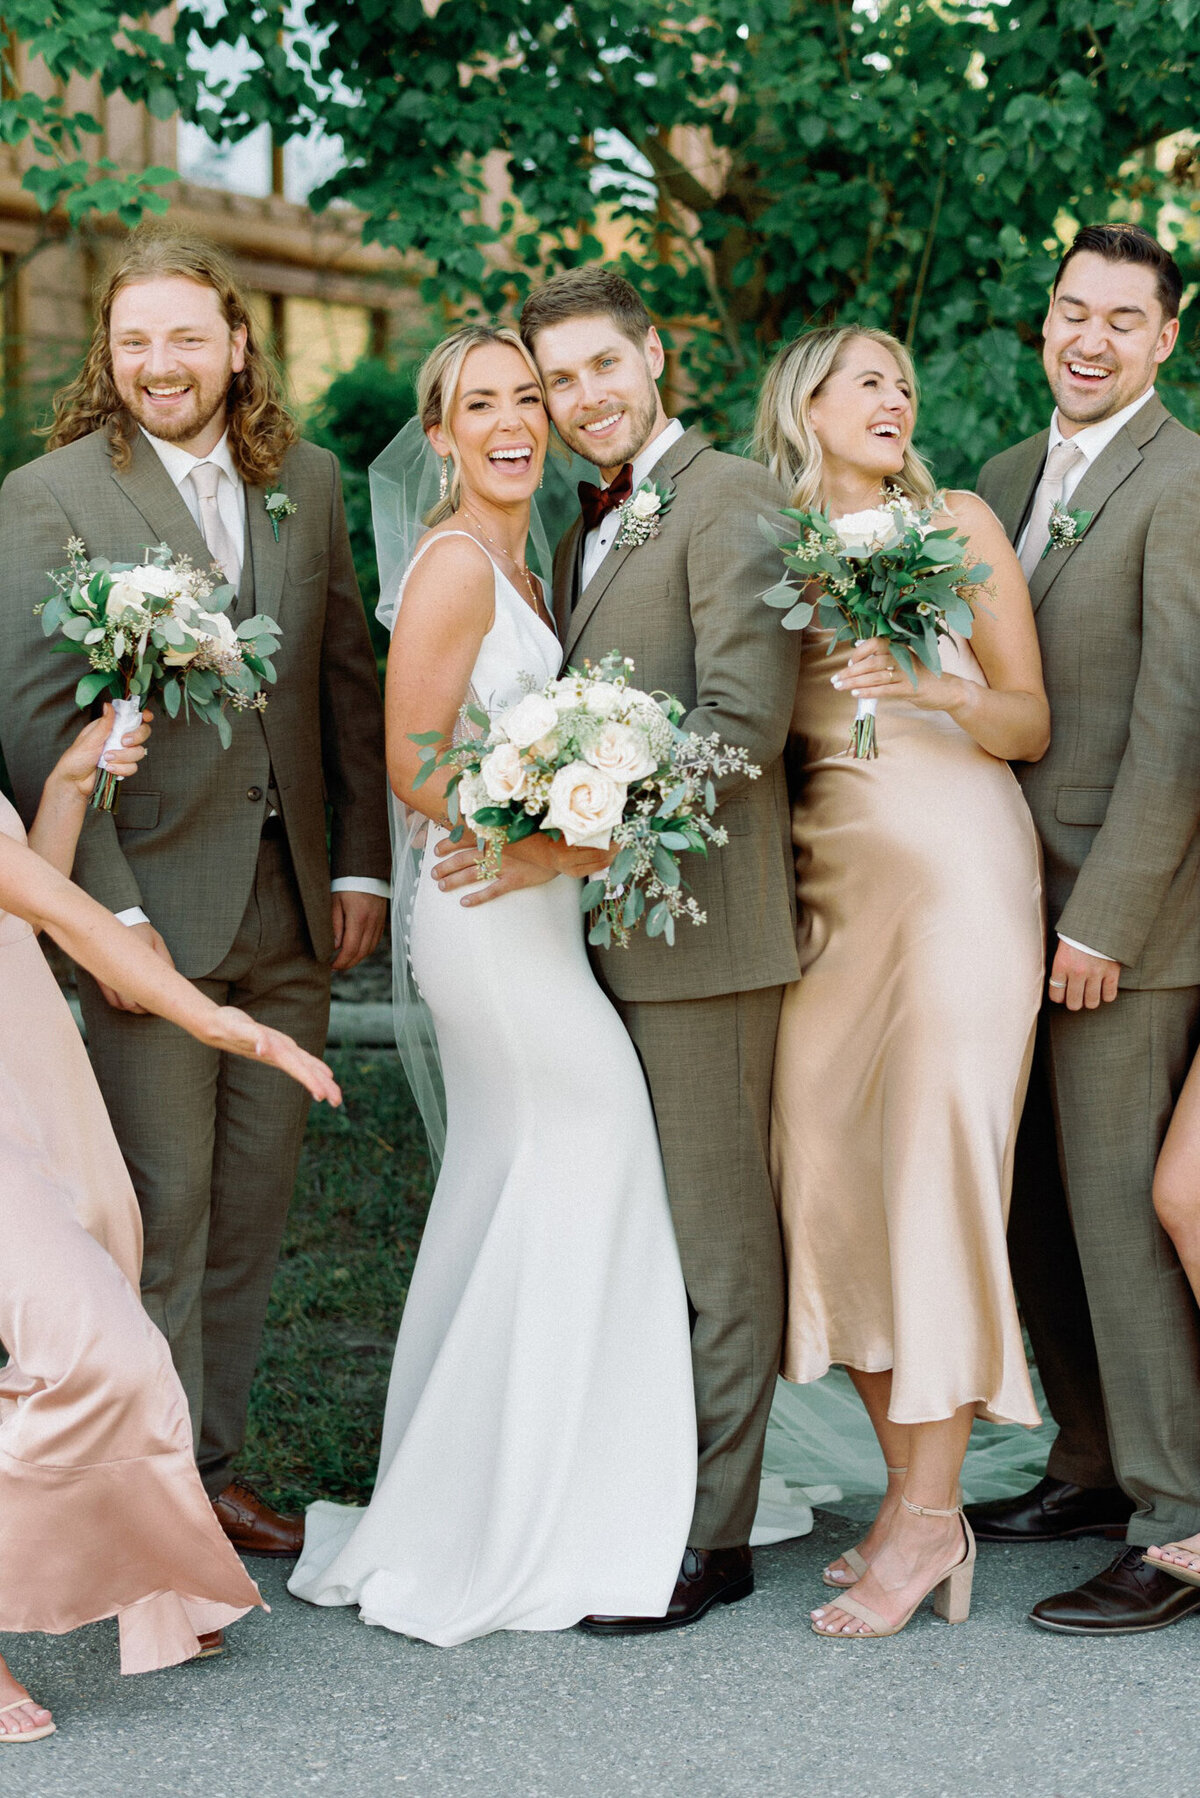 Bridal party laughing, captured by Kaity Body Photography, elegant film inspired wedding photographer in Calgary, Alberta. Featured on the Bronte Bride Vendor Guide.